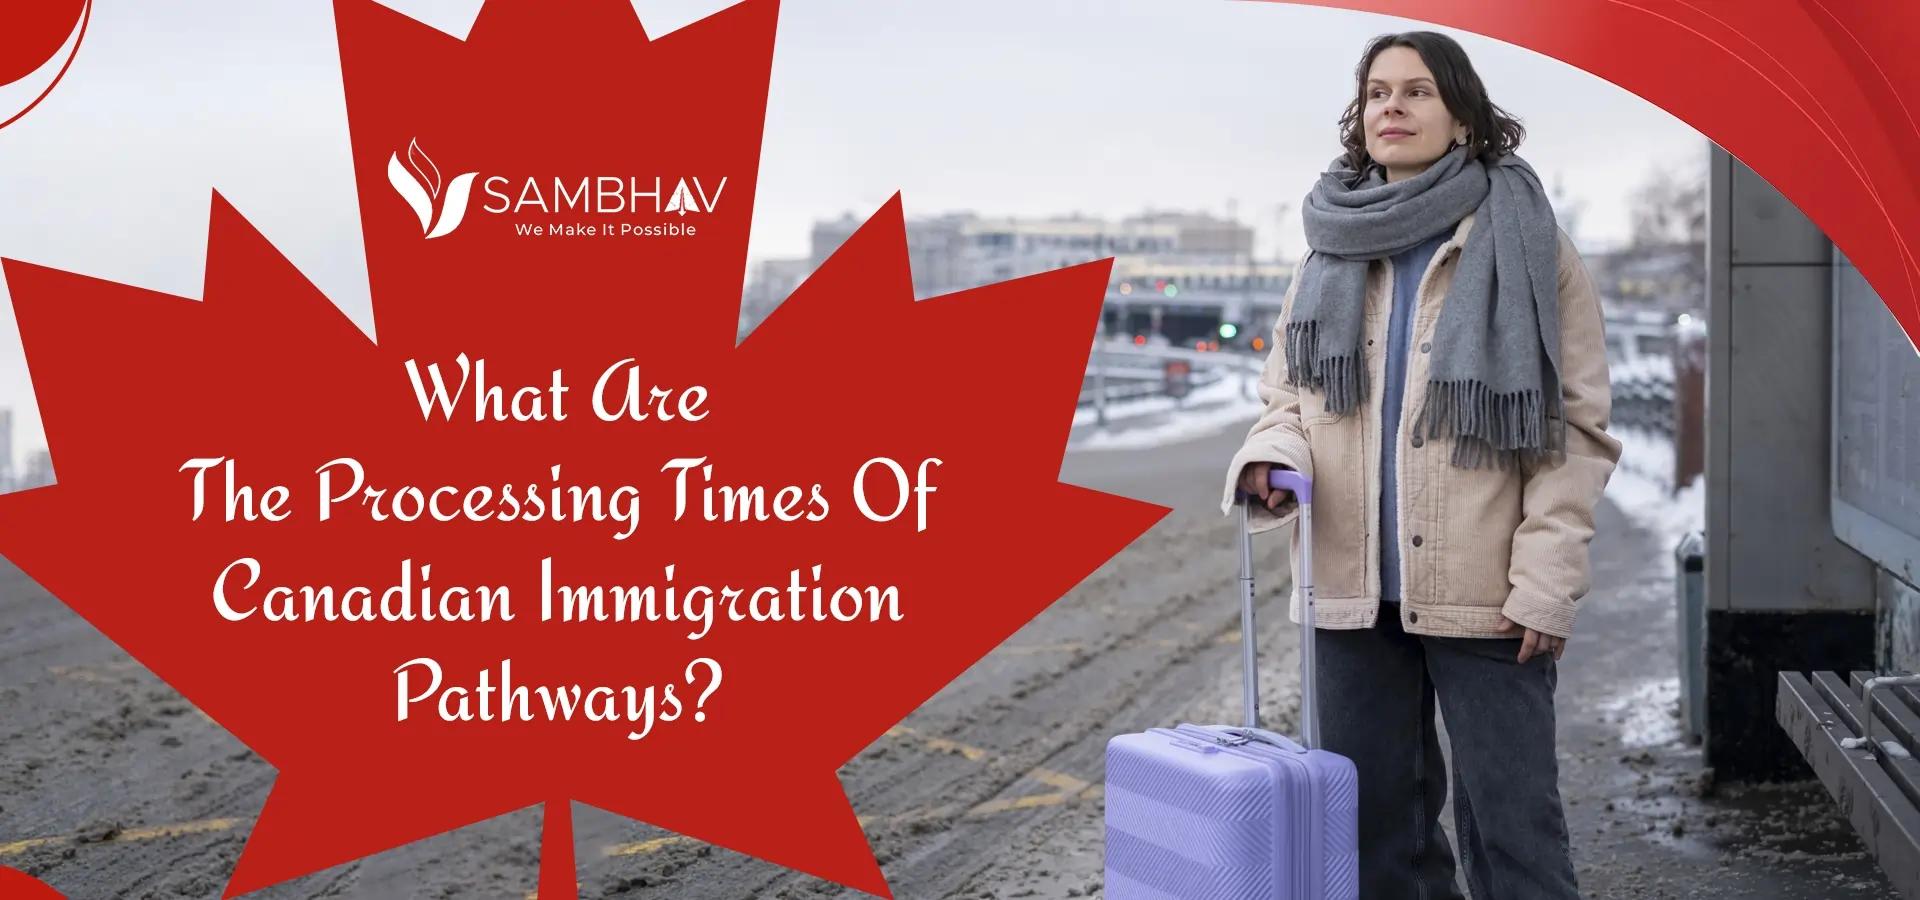 What Are The Processing Times Of Canada Immigration Pathways?